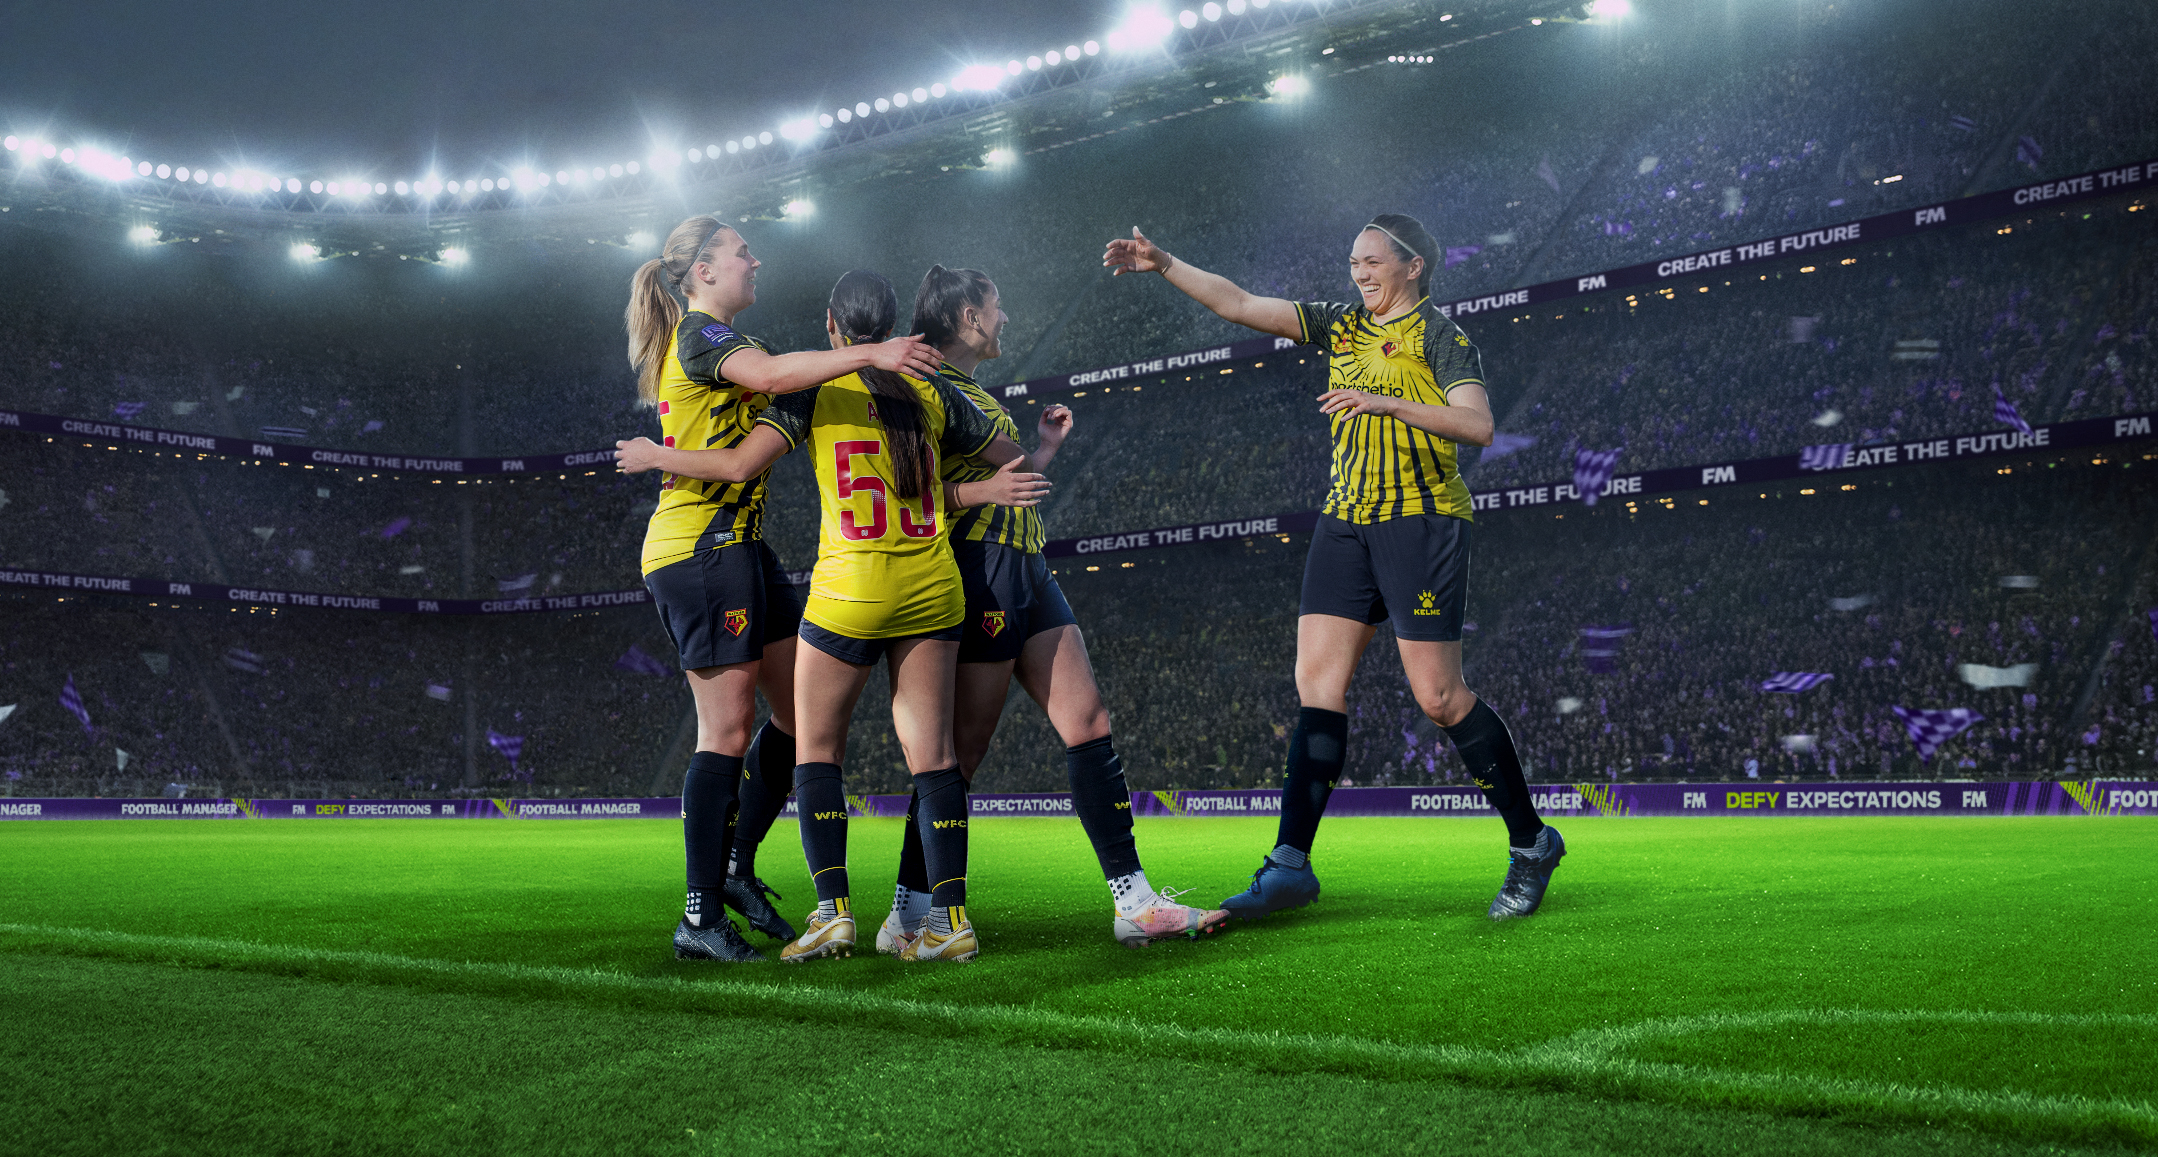  Sports Interactive announces multi-year project to bring women's football to Football Manager 